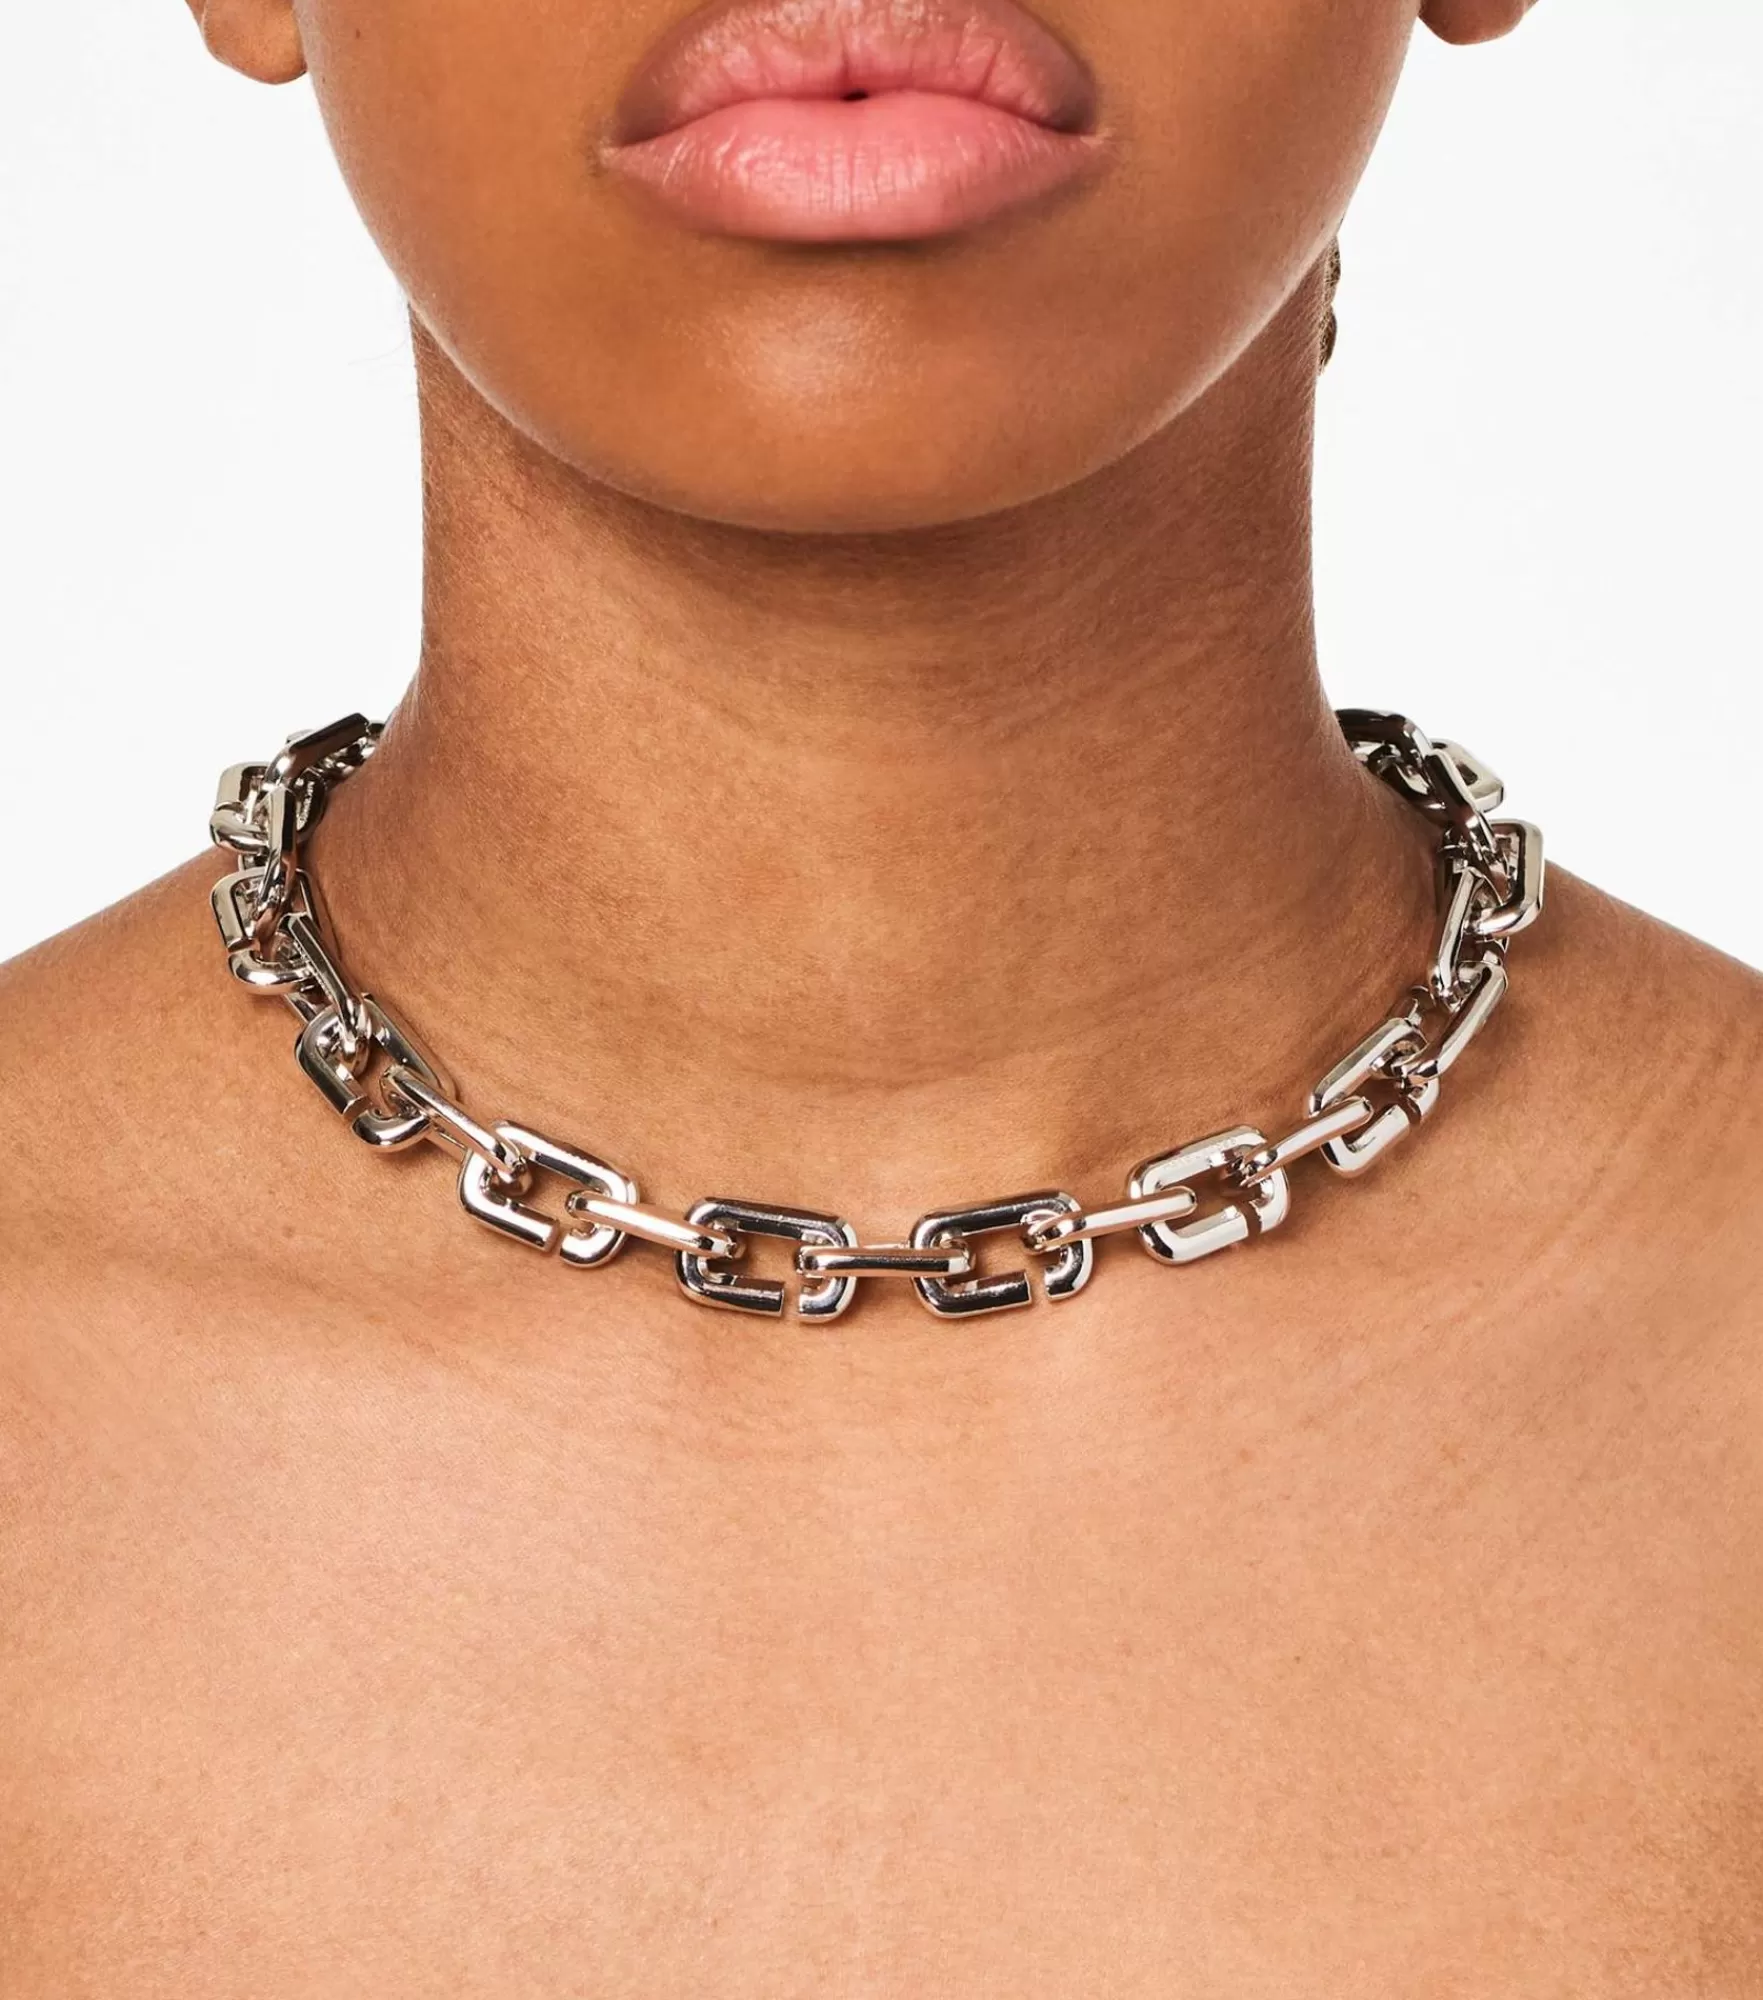 Marc Jacobs The J Marc Chain Link Necklace | Colliers